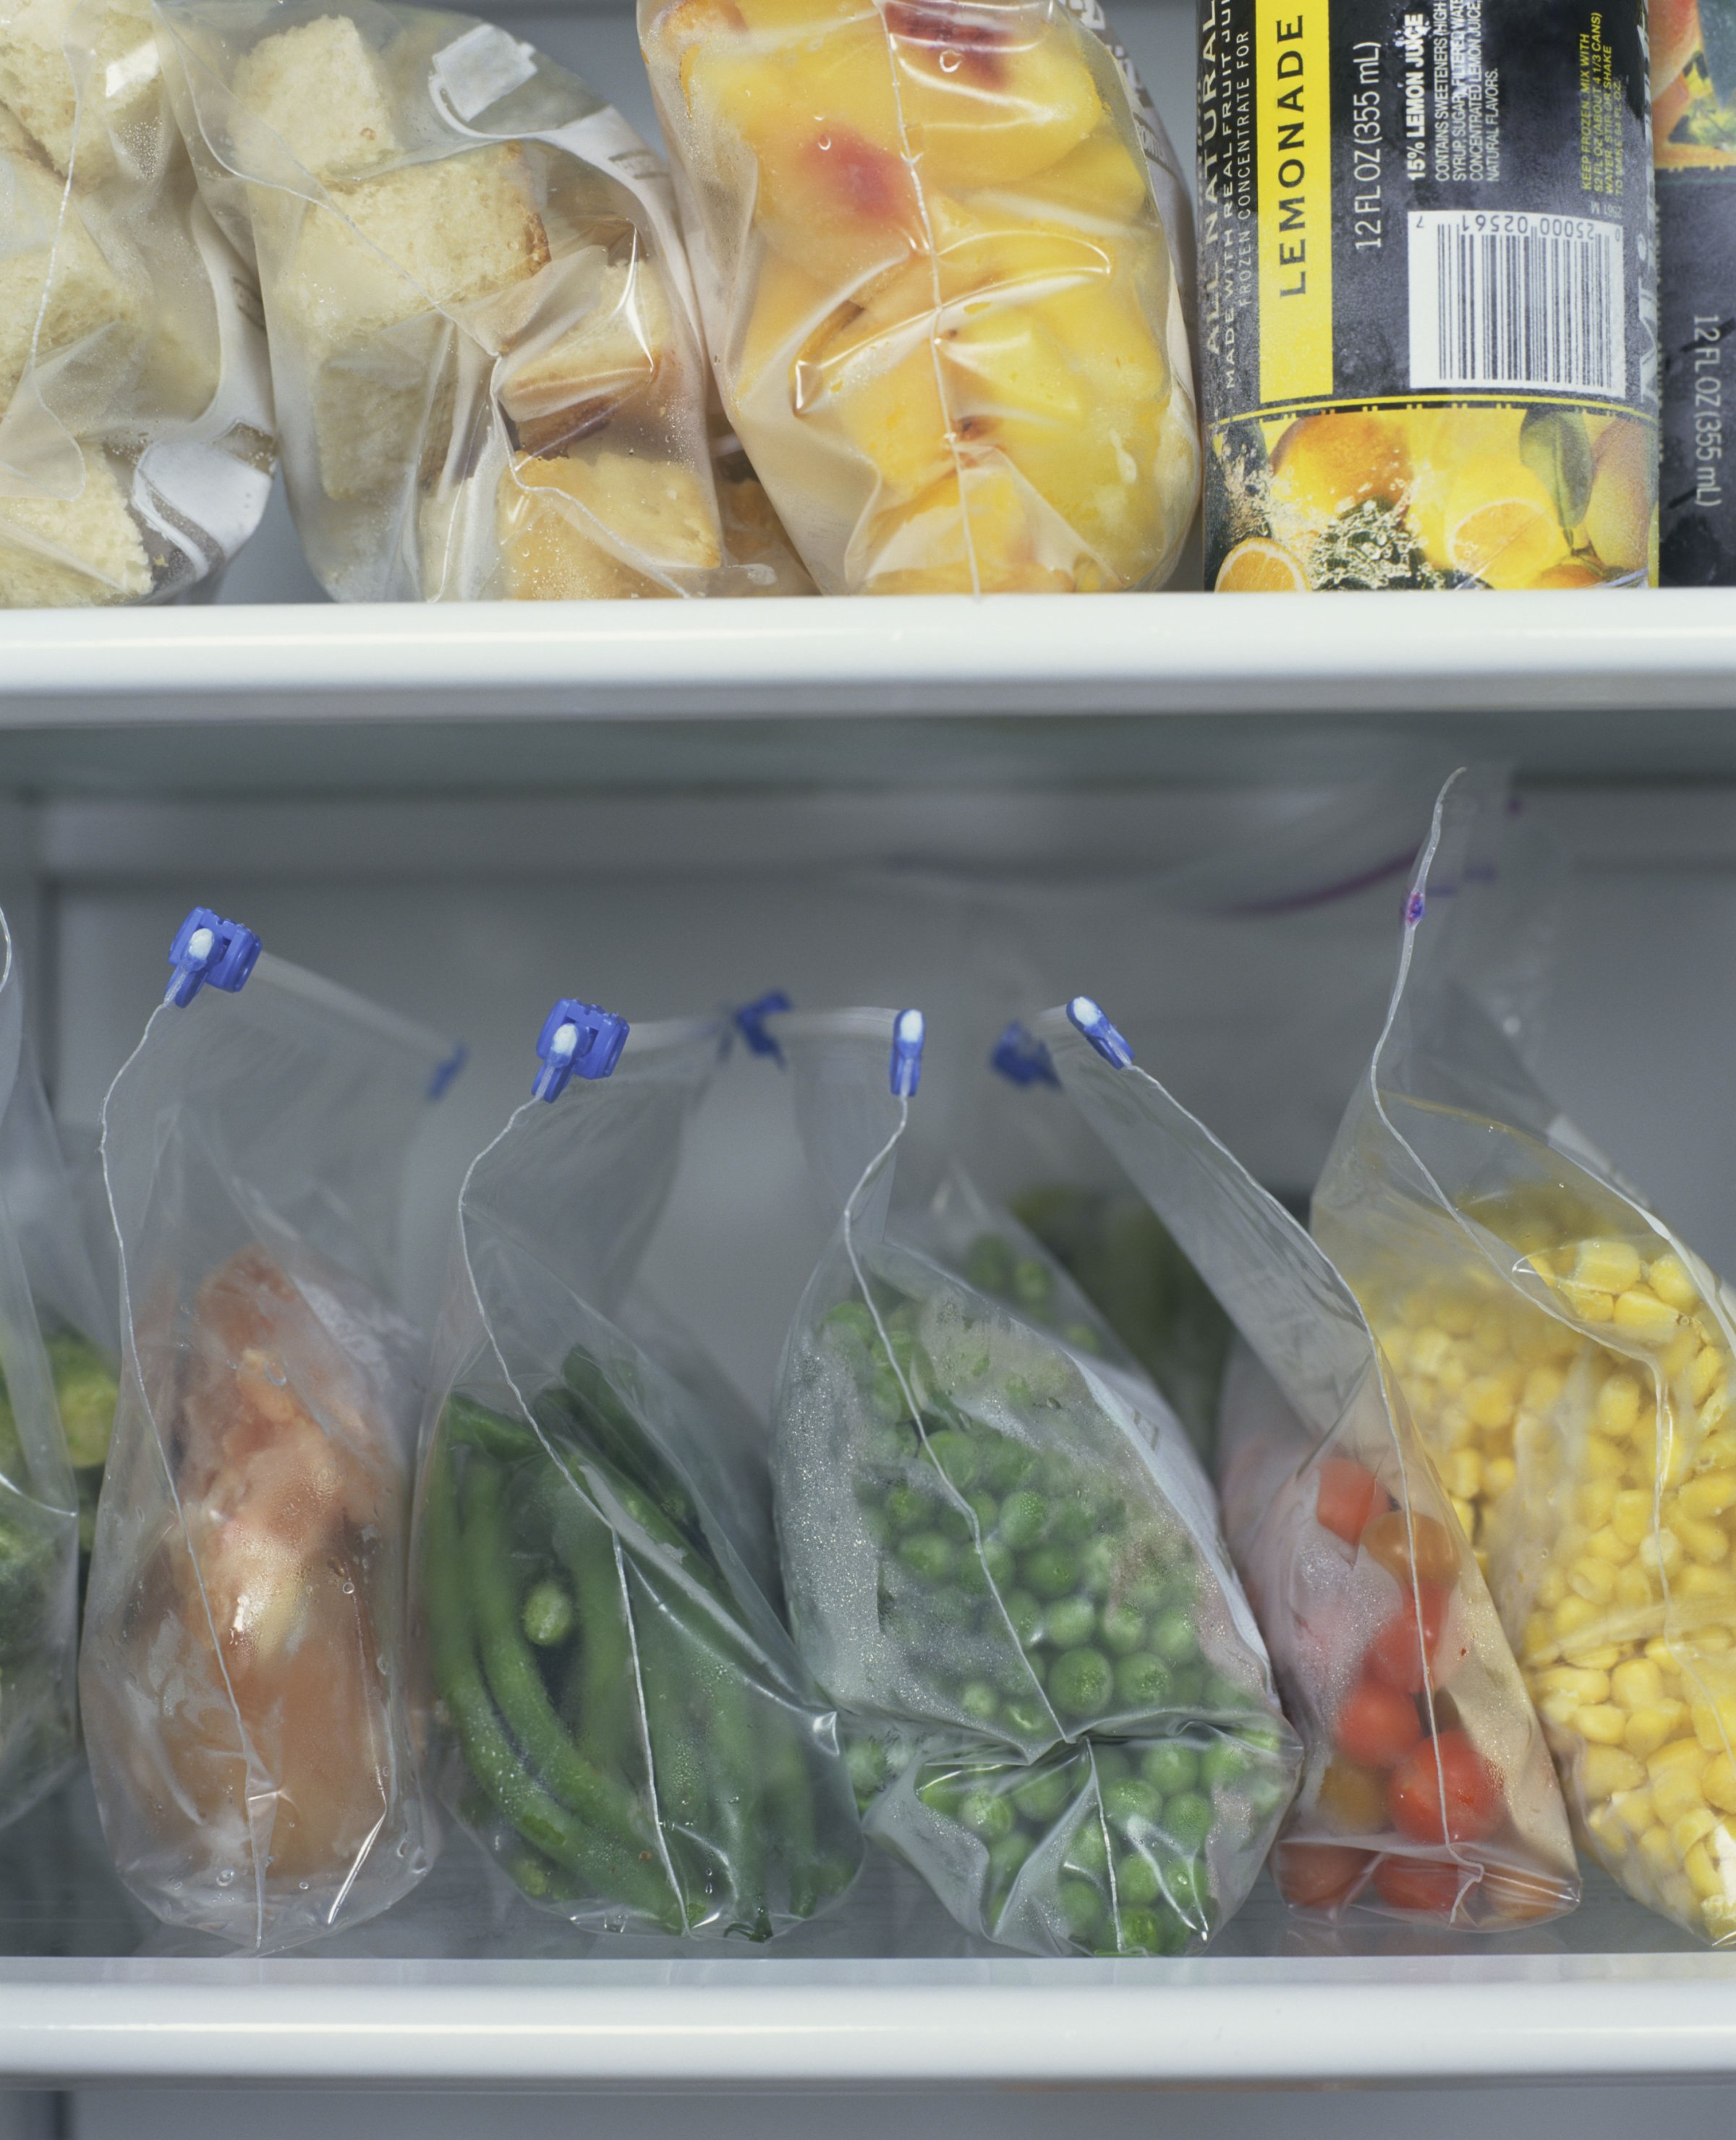 Why Millennials Need to Develop a Taste for Frozen Food